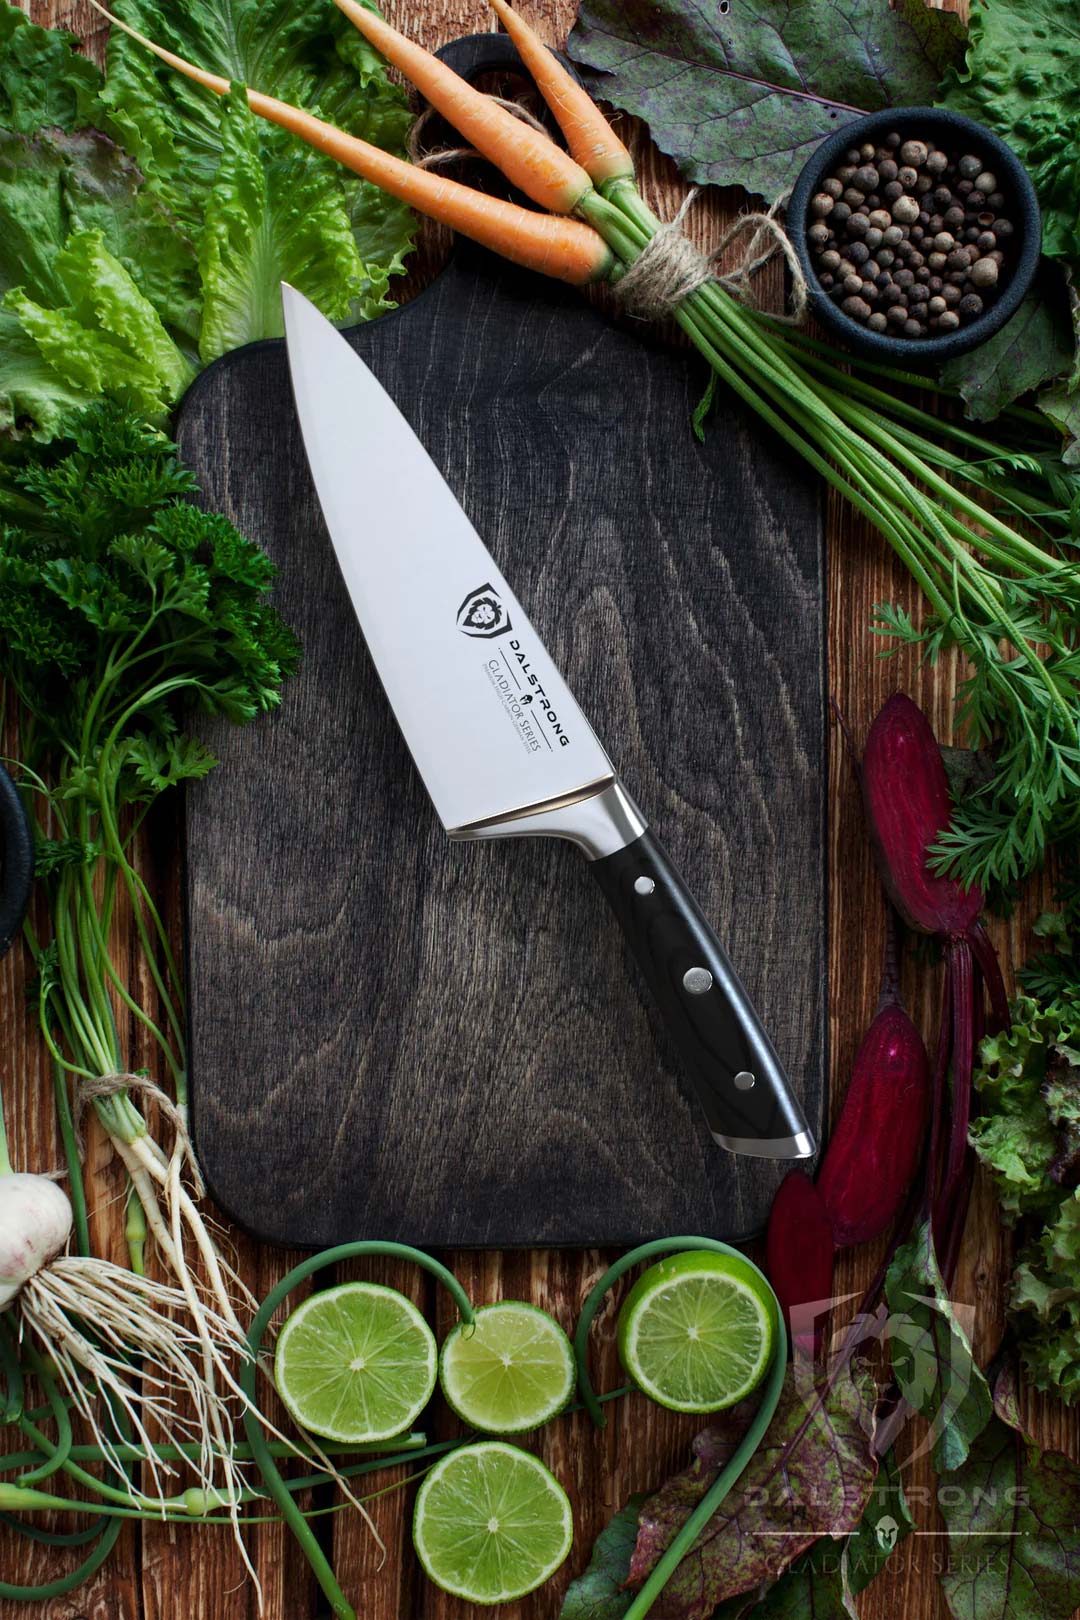 Dalstrong gladiator series 6 inch chef knife with black handle in the middle of vegetables and herbs.